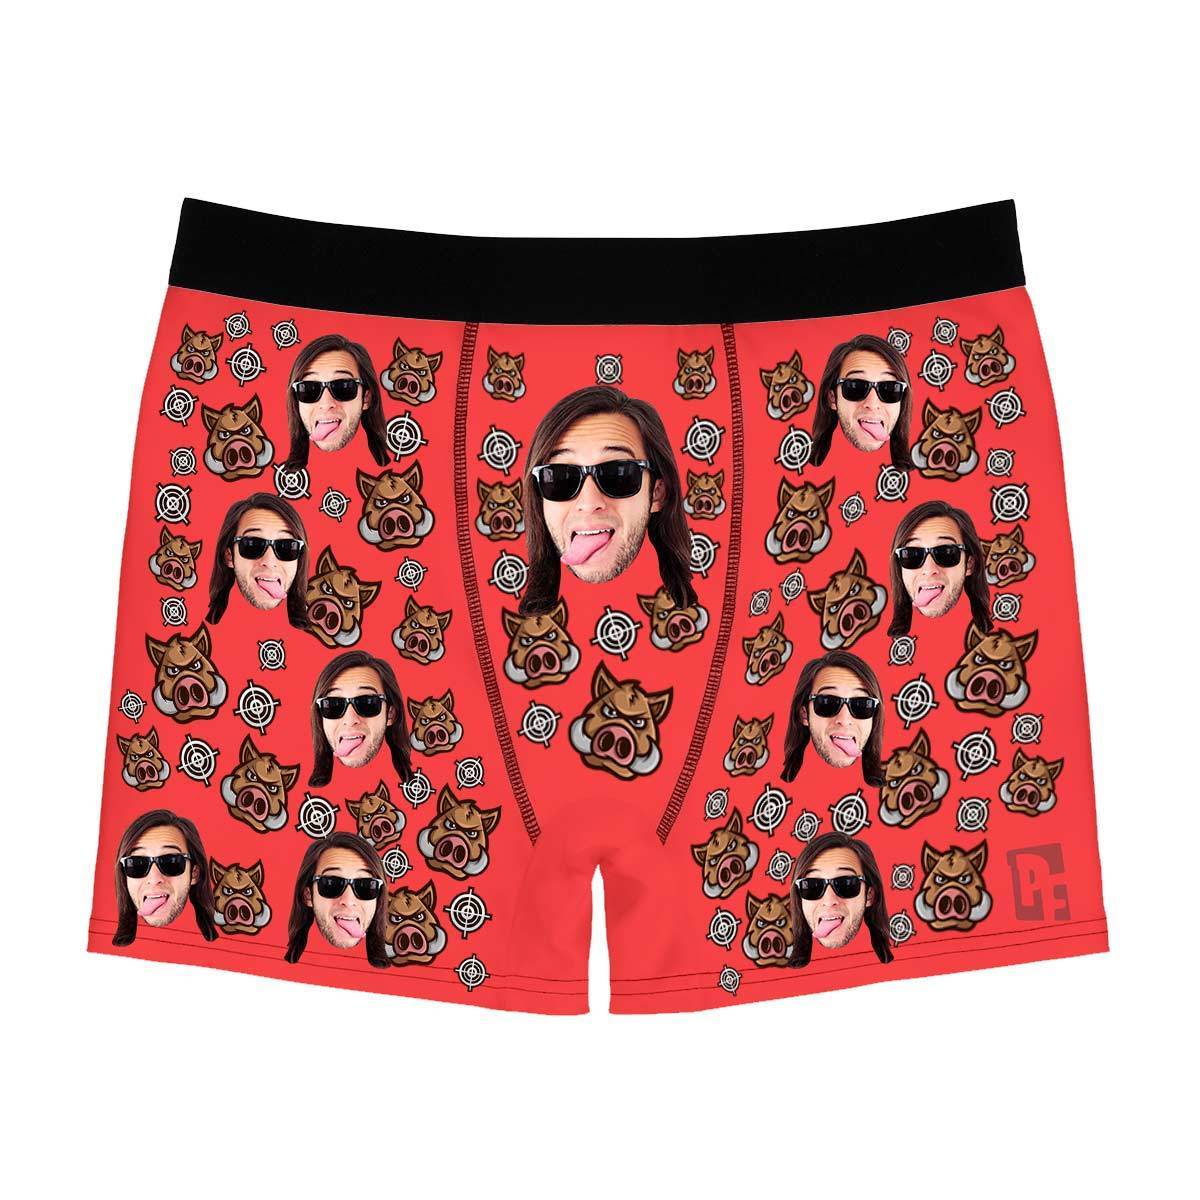 Red Boar Hunter men's boxer briefs personalized with photo printed on them